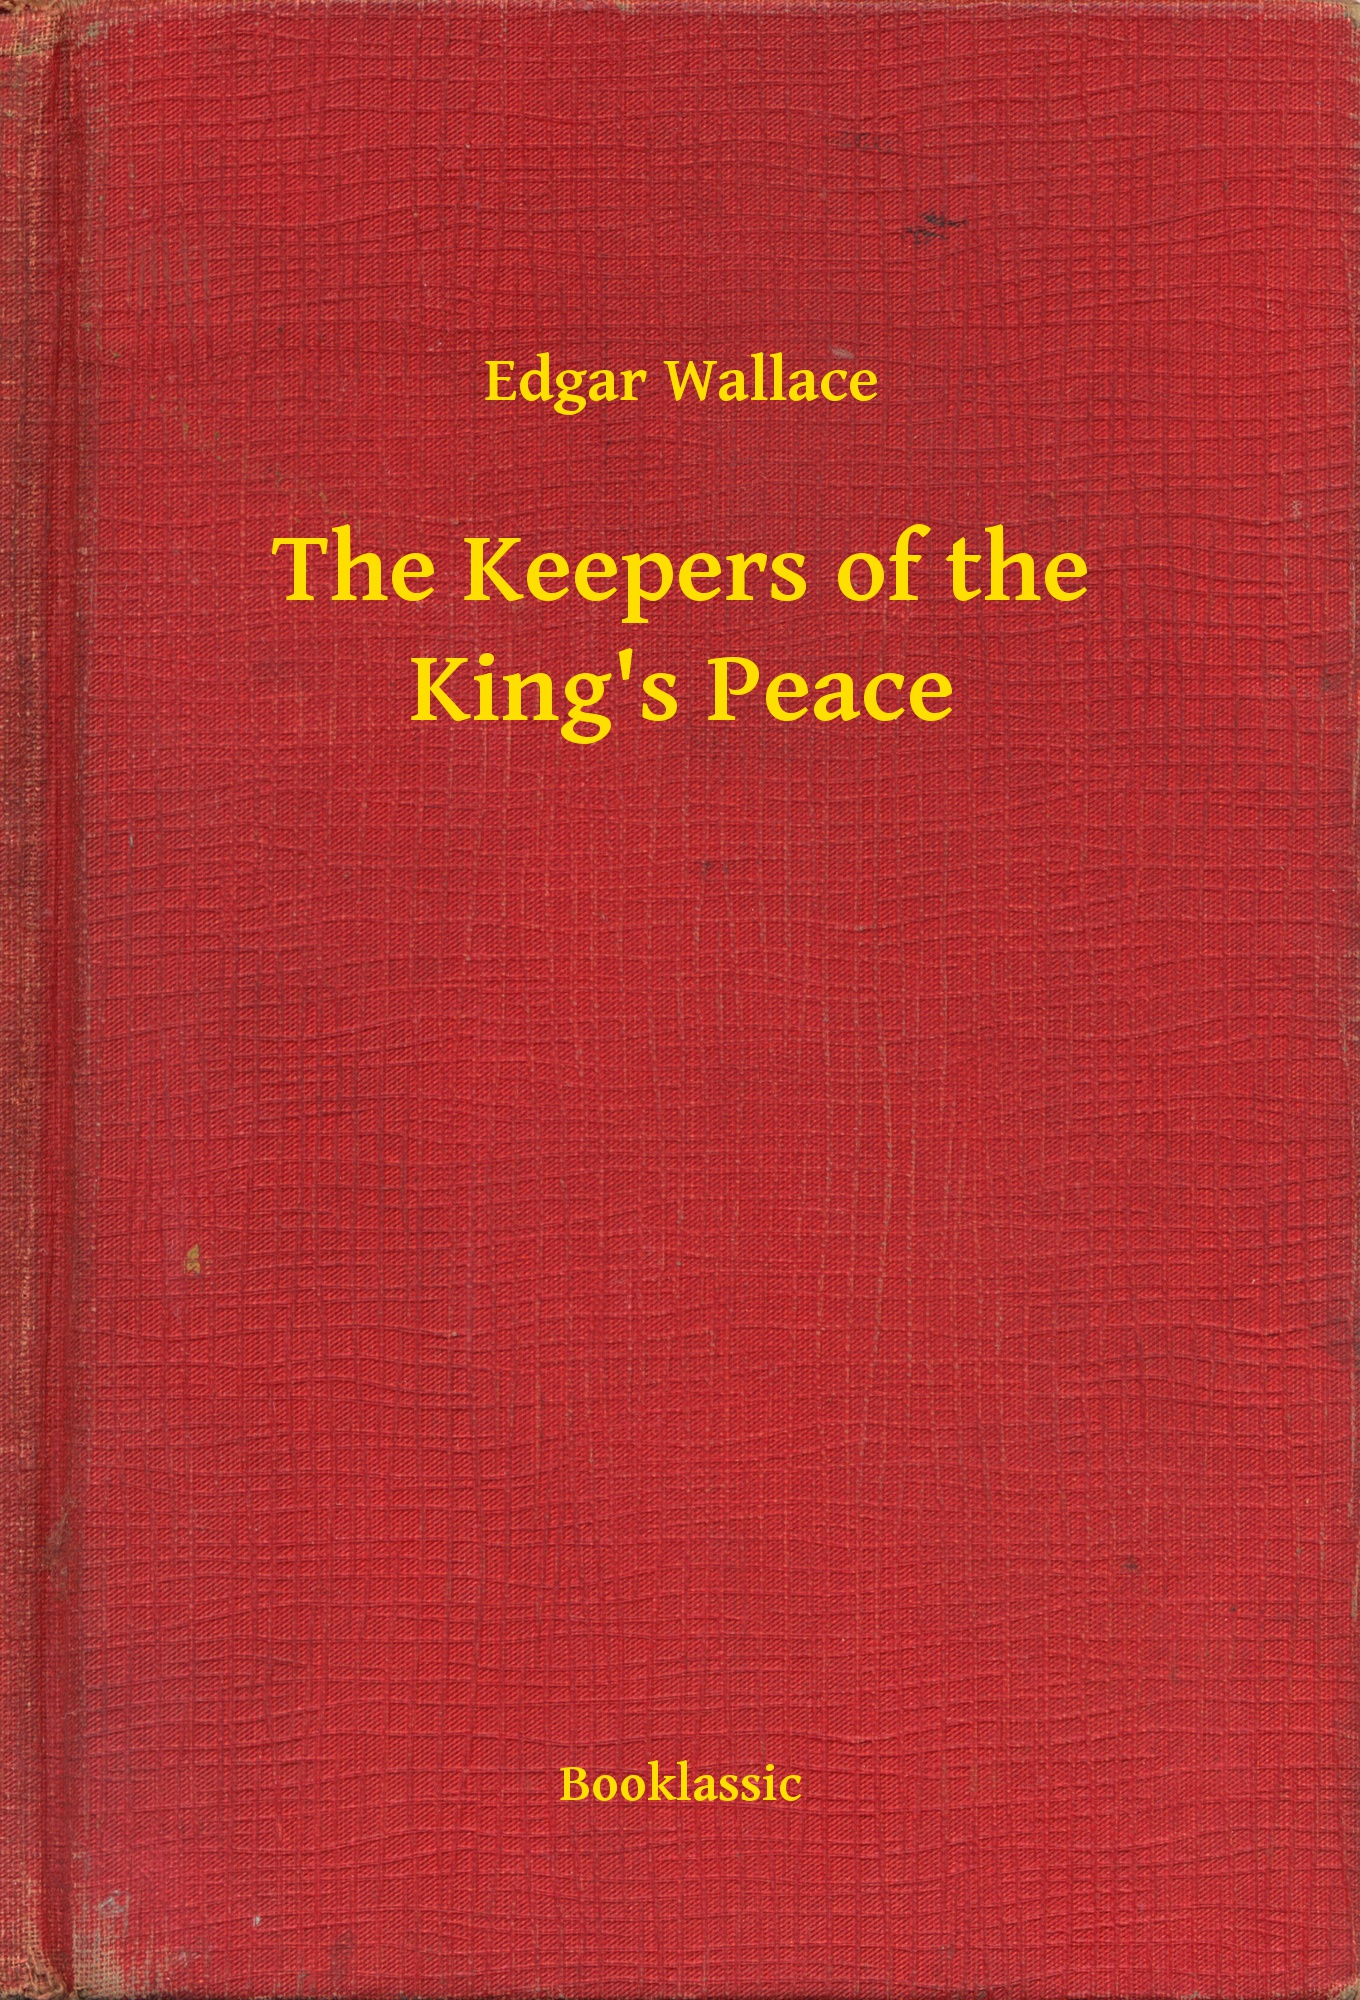 The Keepers of the King"s Peace